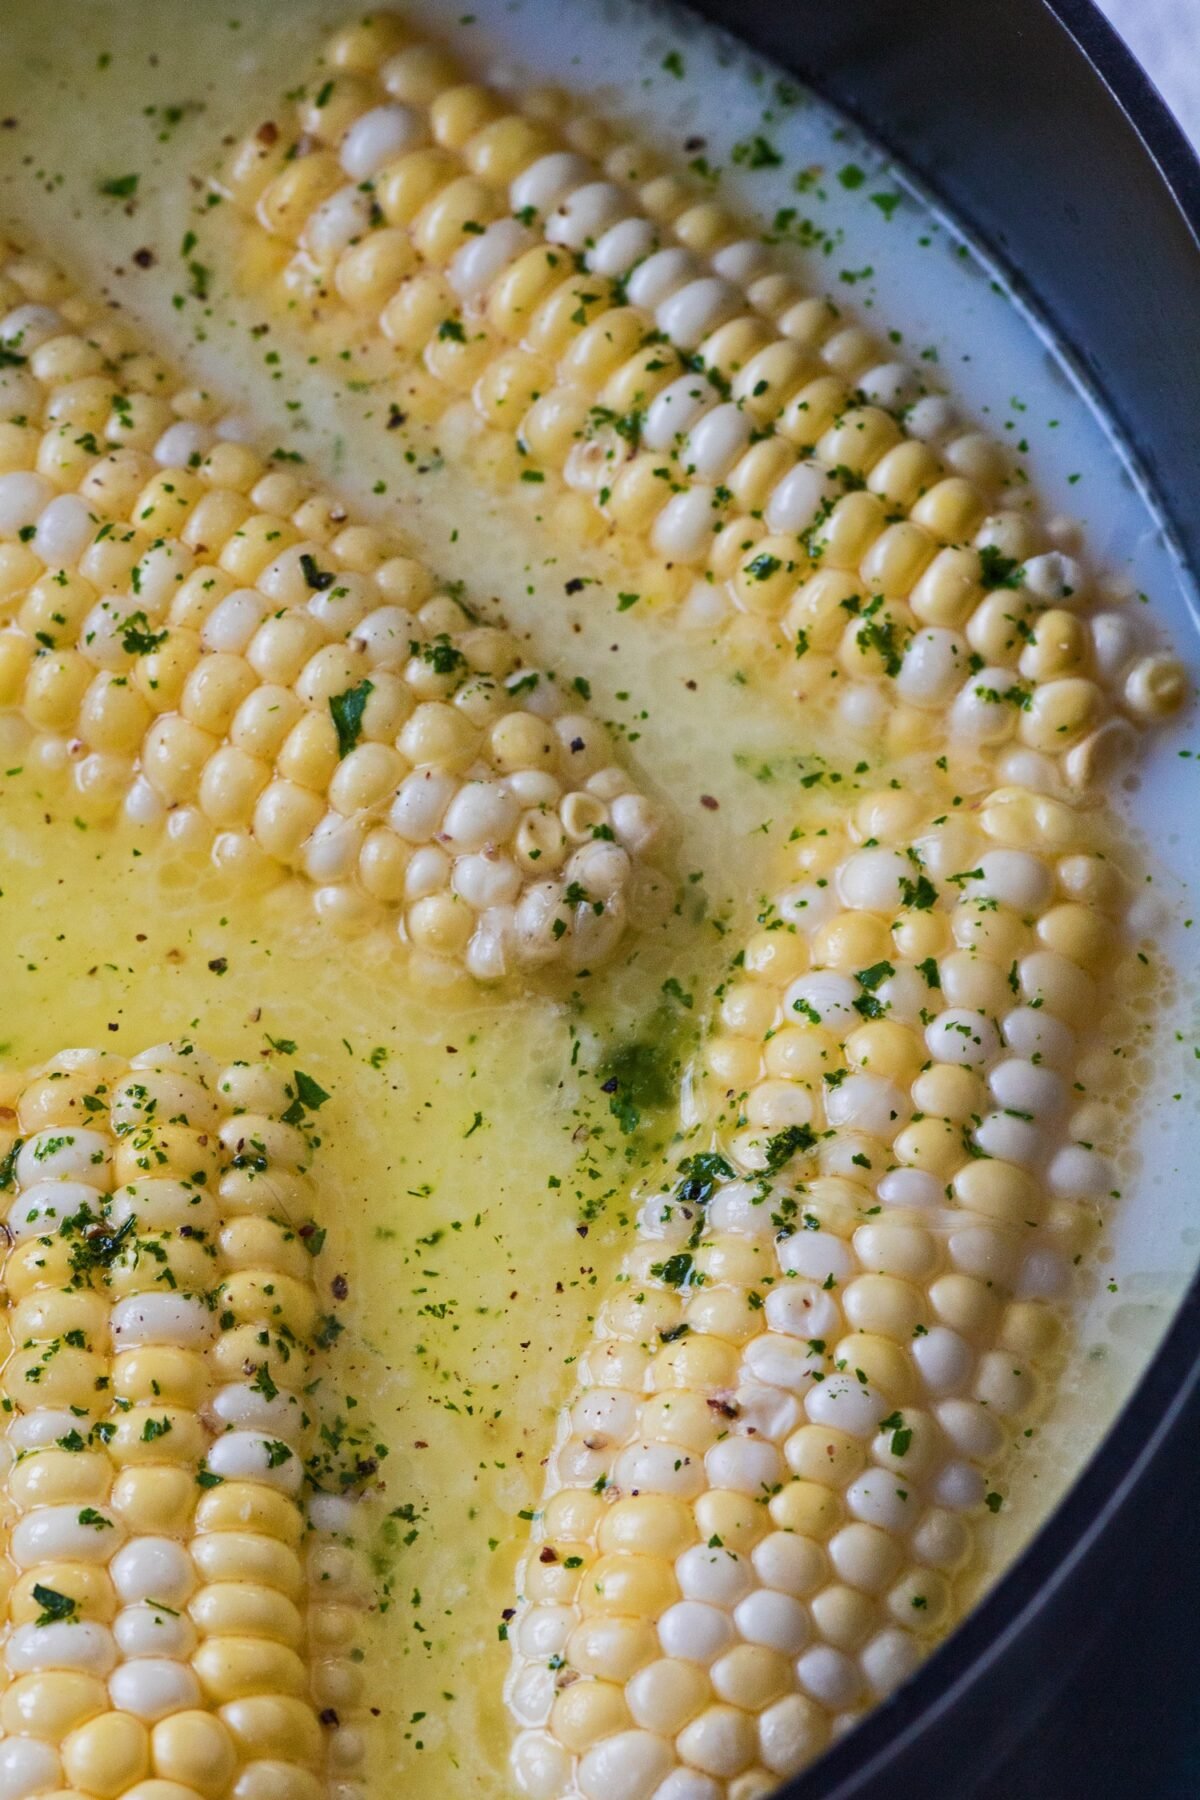 close up photo of halved sweet corn cobs shown in the water, milk, and butter mixture that they were boiled in on the stovetop